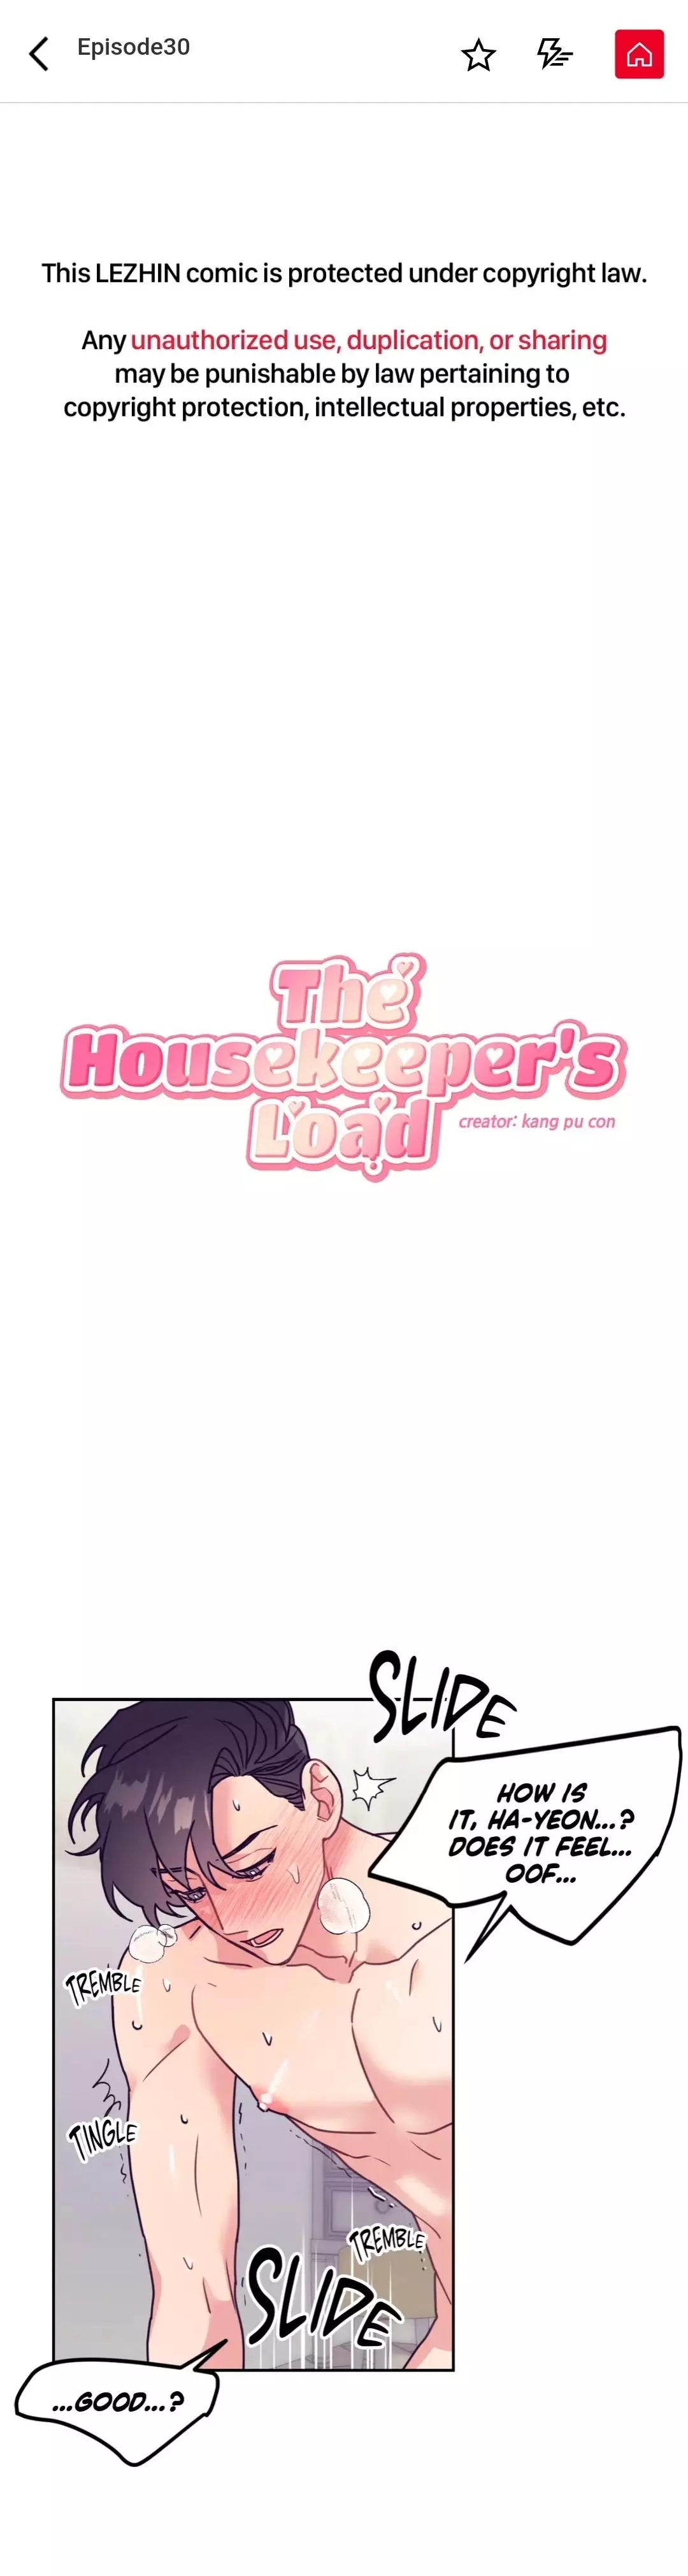 The Housekeeper's Load - 30 page 1-4a54b11d